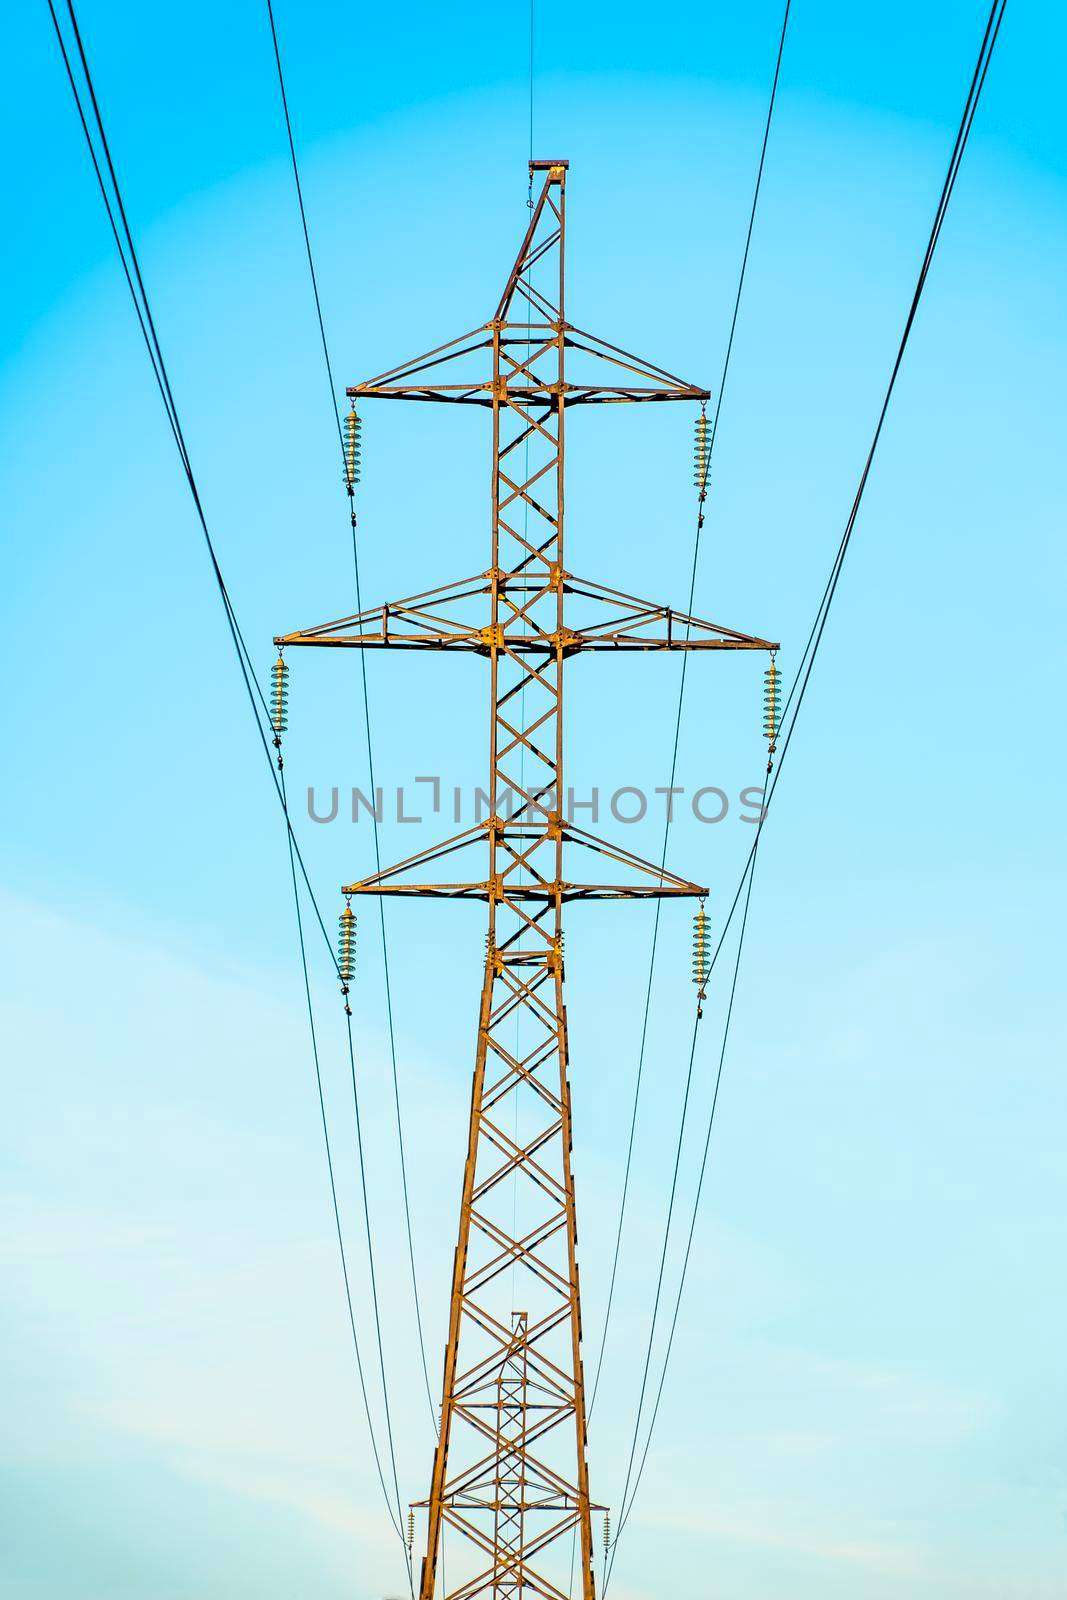 Production of fuel and electricity.Electrical networks with wires and transformers at sunset.Power transmission lines and from the power plant.Power lines with wires under voltage and electric current